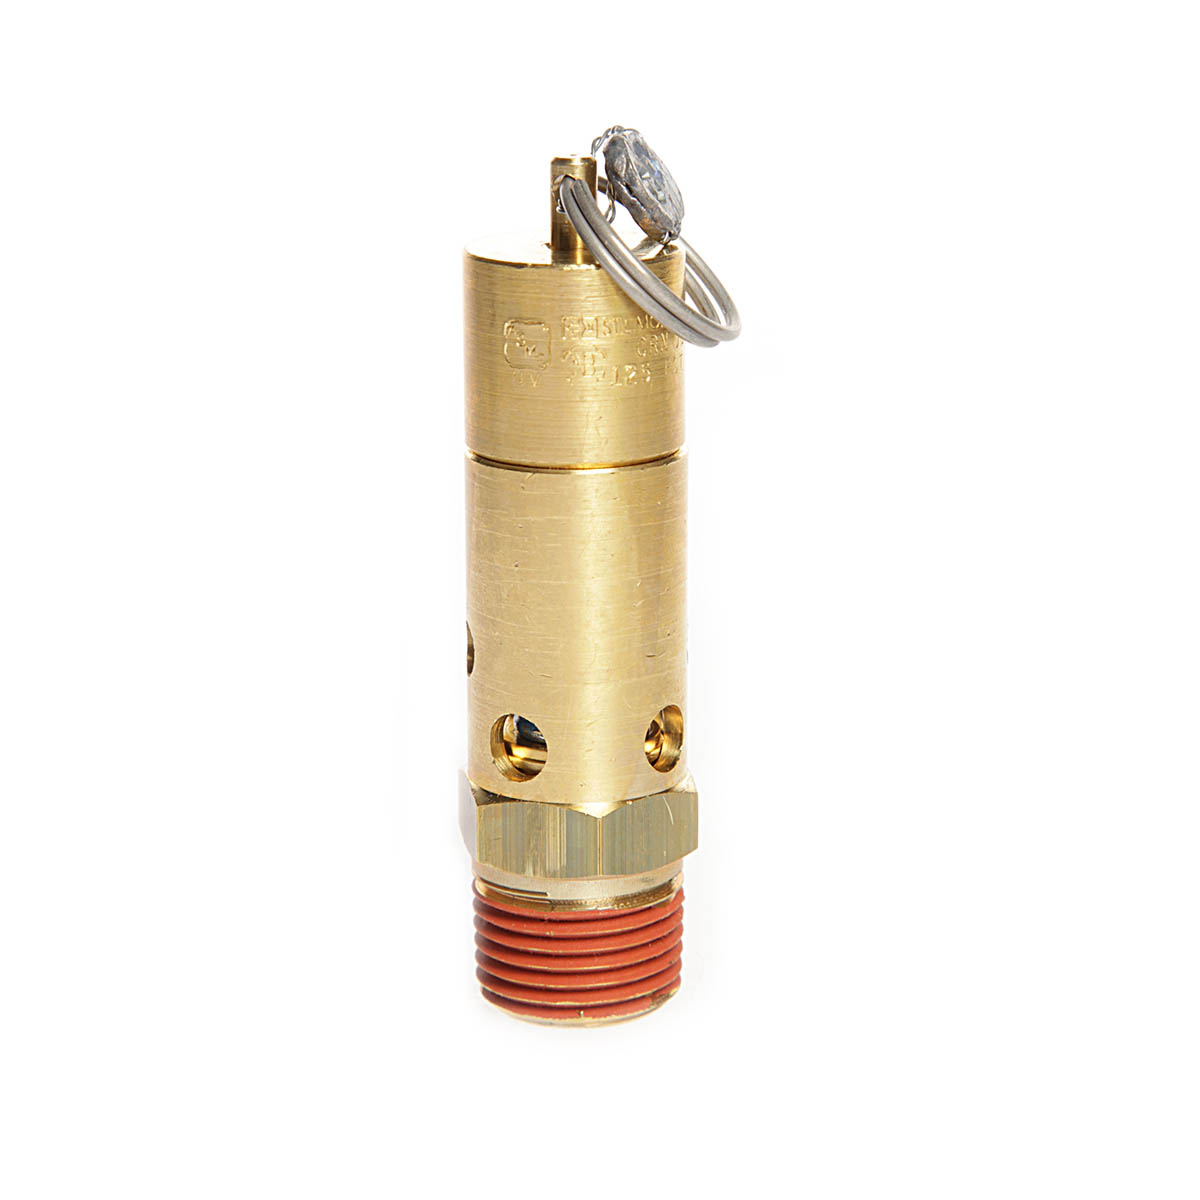 1/2 Male NPT Control Devices SF50-1A060 SF Series Brass Soft Seat ASME Safety Valve 60 psi Set Pressure 